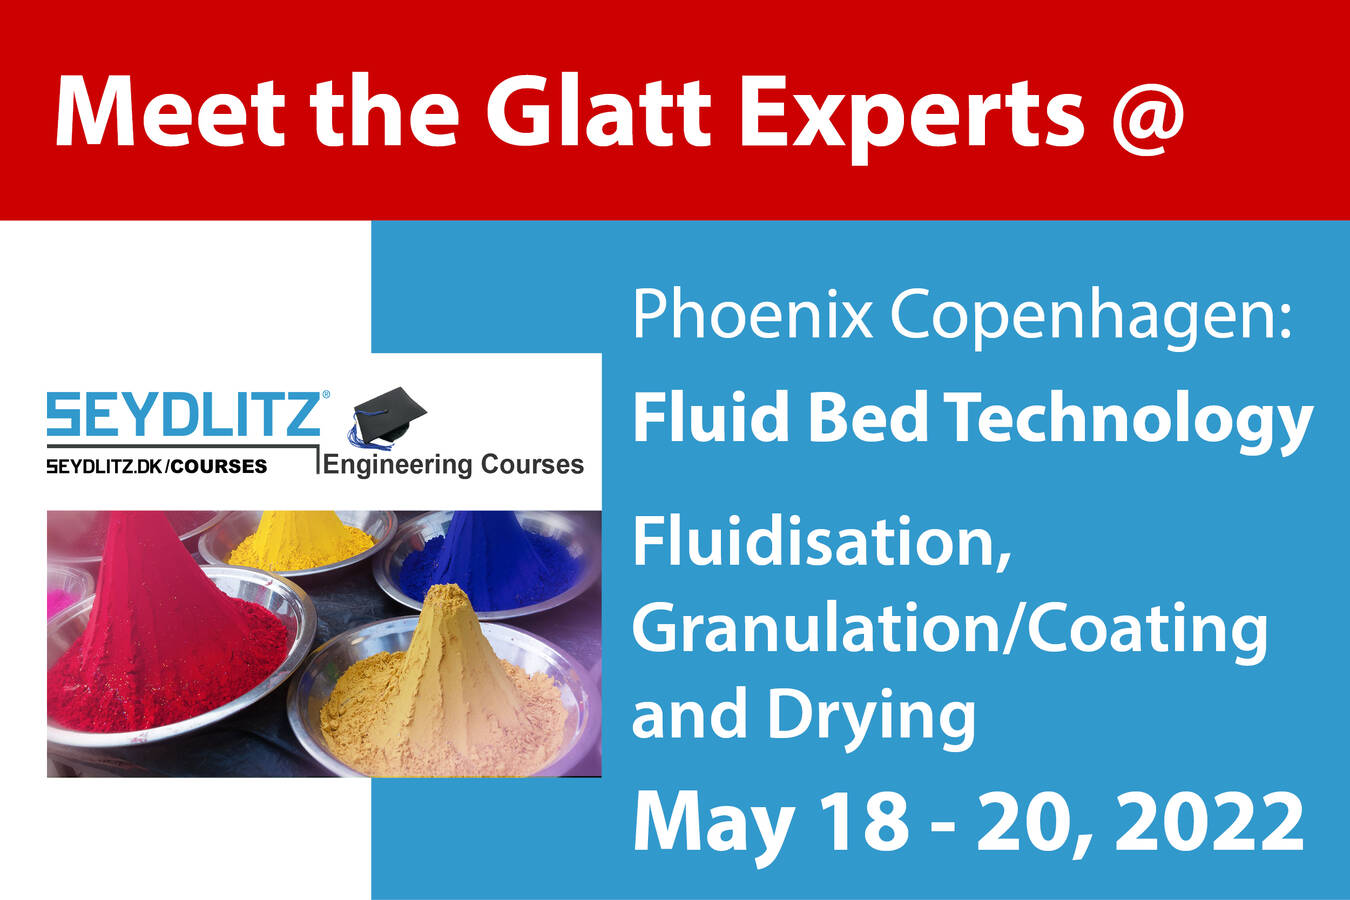 Course fluid beds: fluidization, granulation/coating and drying Meet the Glatt experts in a course about Fluidized Bed Technology, from May 18 - 20 2022 in Phoenix Copenhagen. Part of the Seydlitz Engineering Courses